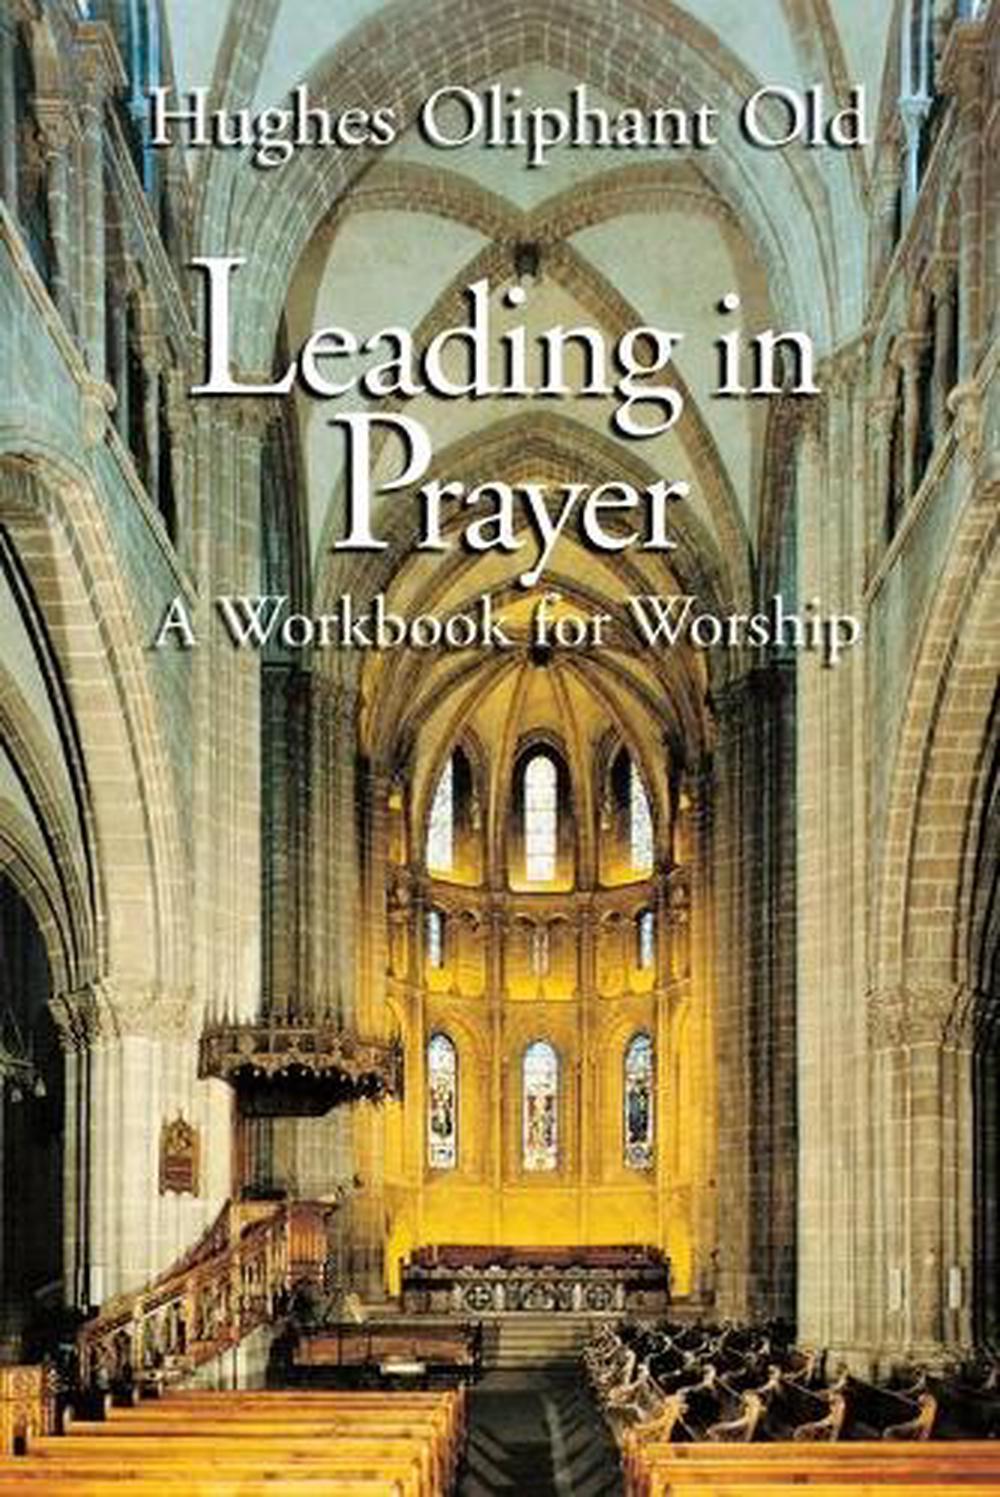 Leading in Prayer A Workbook for Worship by Hughes Oliphant Old (English) Paper 9780802808219